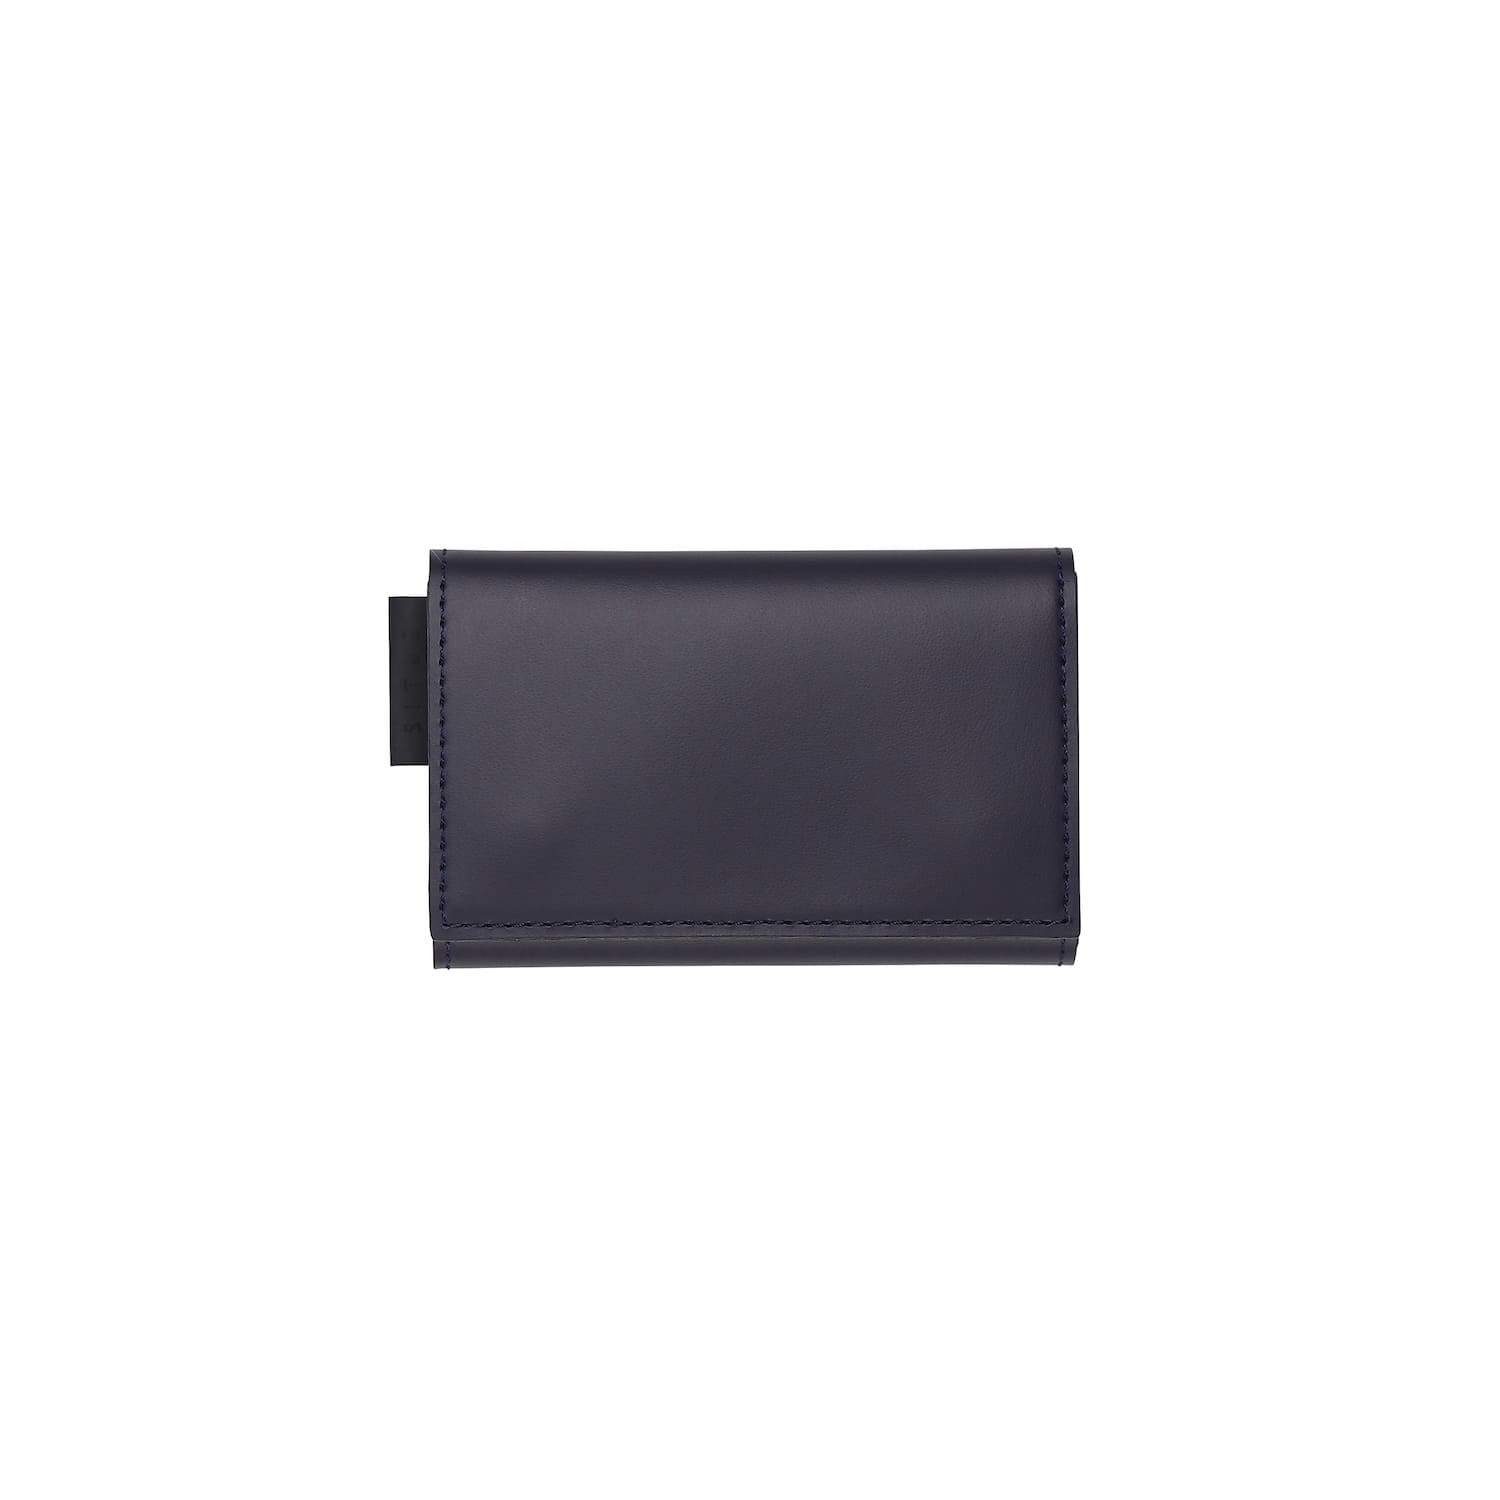 SITUS Tiny Wallet Recycled Leather | Black【Key Pocket付き ...